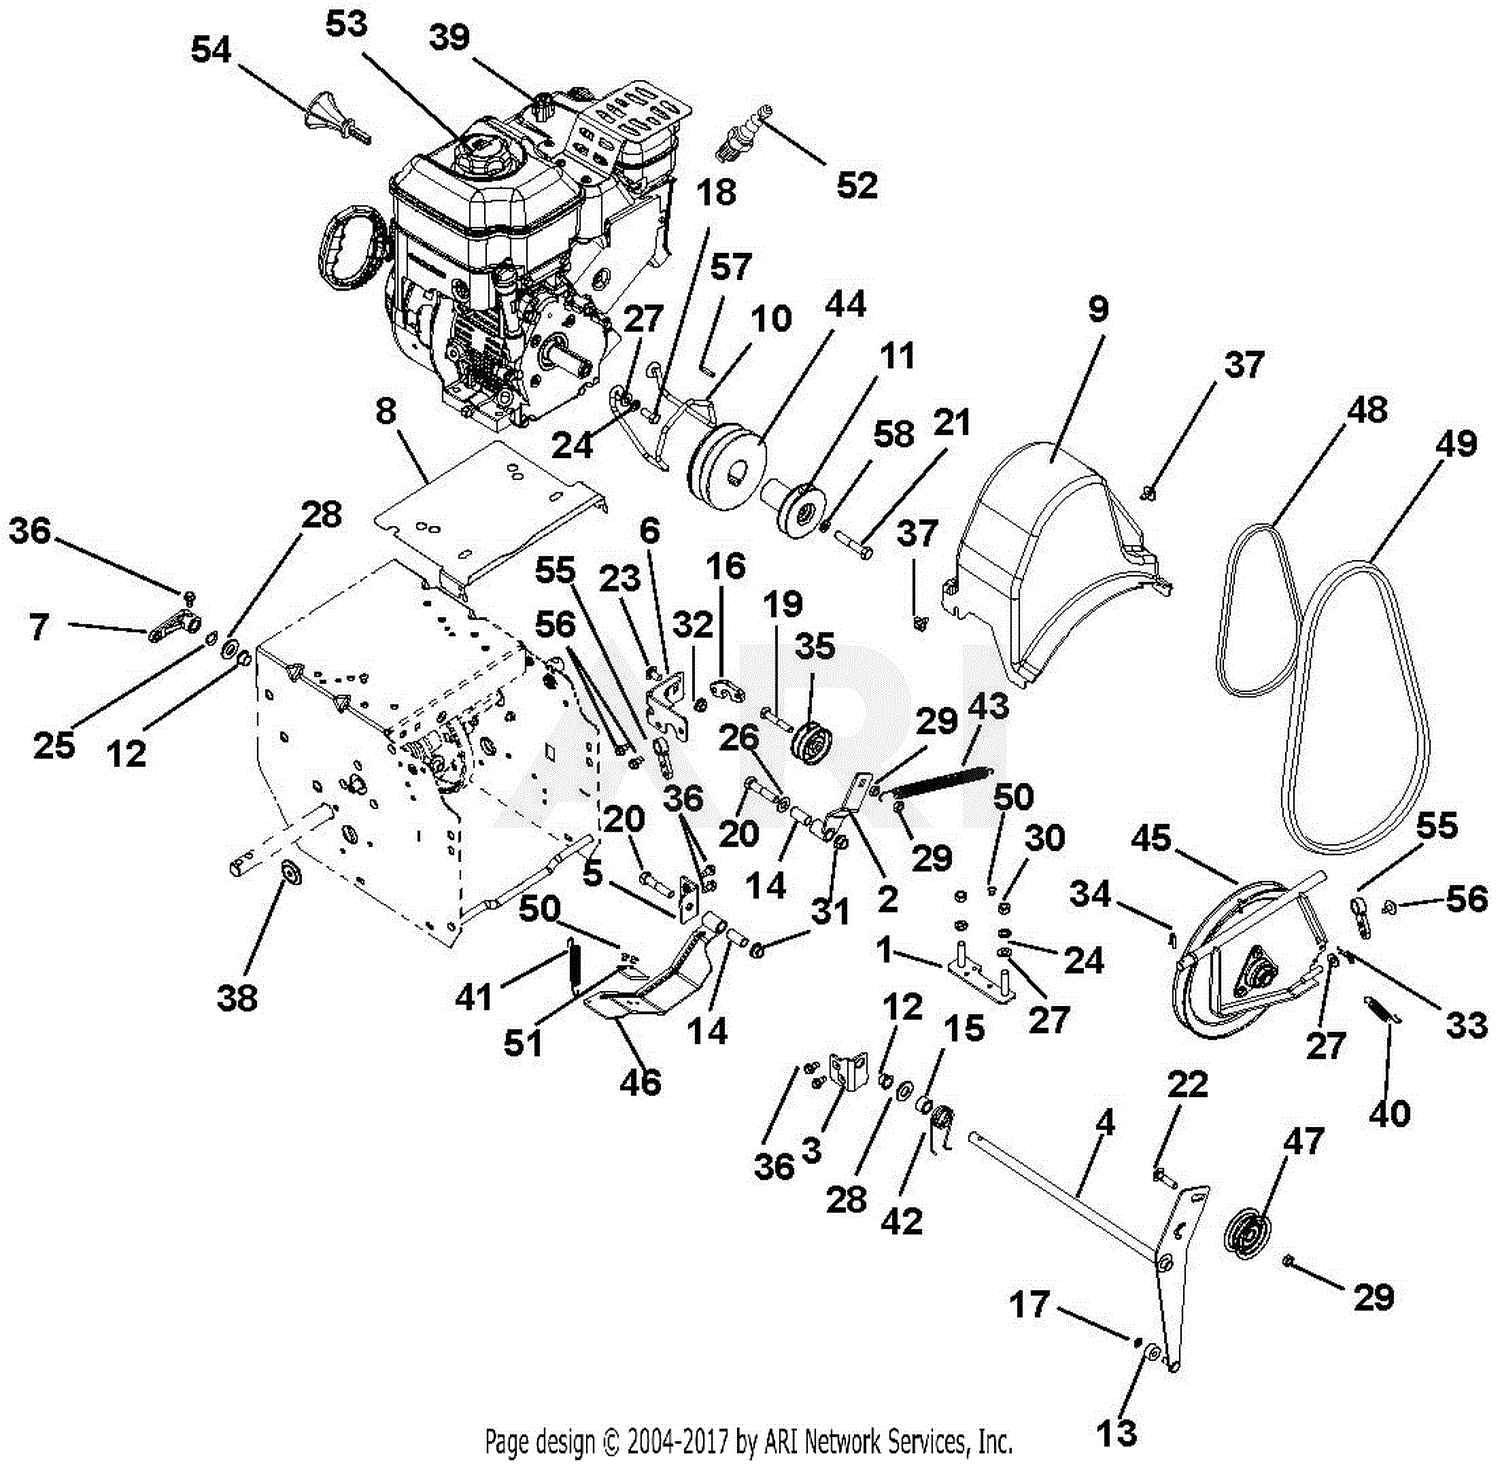 Ariens 920021 (000101 - 075999 ) Compact 24 Parts Diagram for Engine